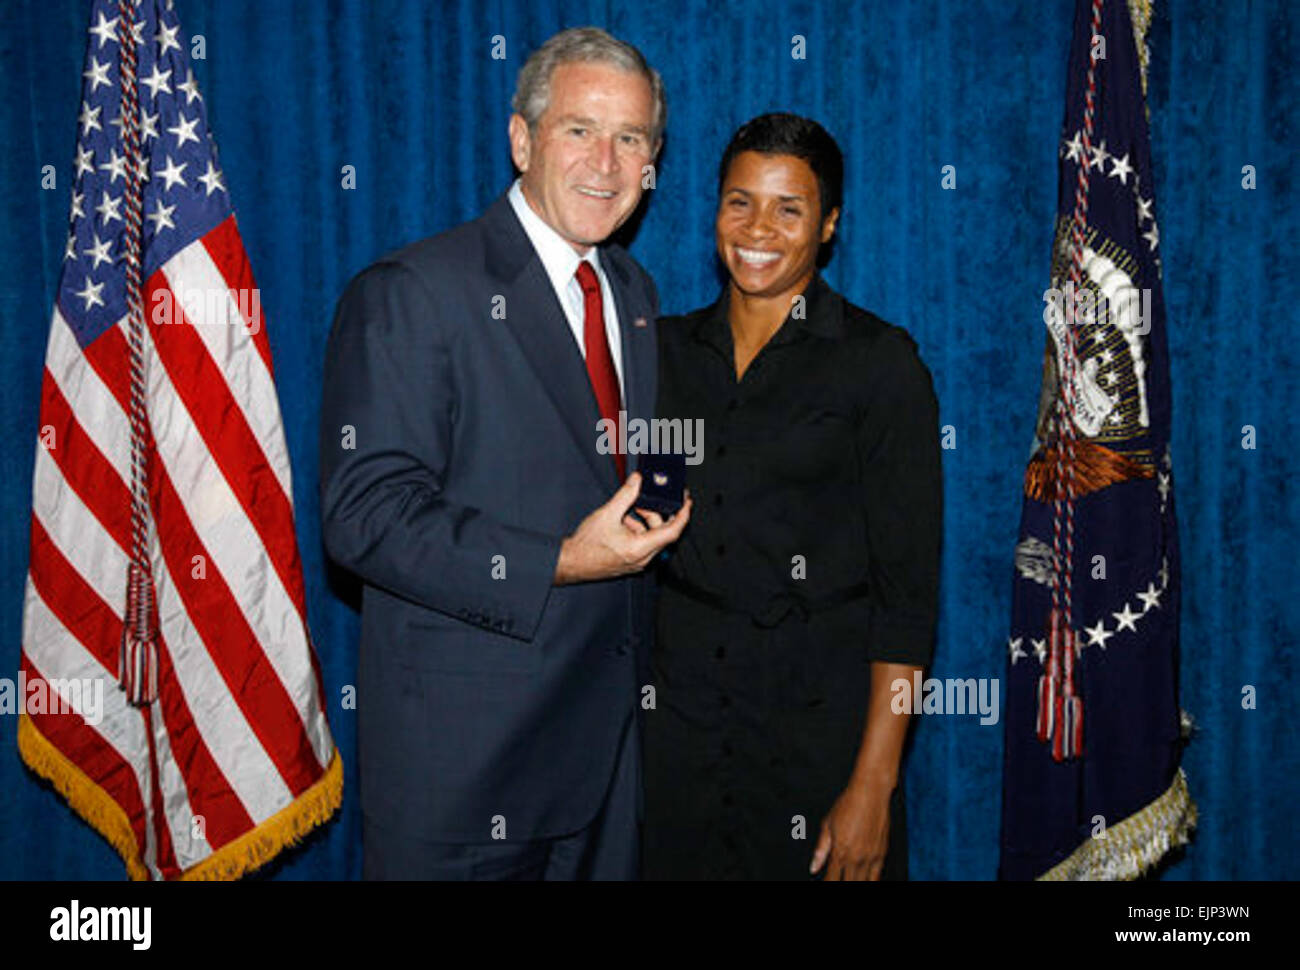 President George W. Bush stands with Keela Carr, a 35-year-old fitness and athletic trainer from Orlando, shortly after his arrival in the Florida city Wednesday, Aug. 20, 2008.  Ms. Carr was recognized by the U.S. Army's Freedom Team Salute Program and named its 500th Volunteer Ambassador.  The Freedom Team Salute is a U.S. Army progam that recognizes citizens for supporting Army veterans.  White House photo by Eric Draper Stock Photo